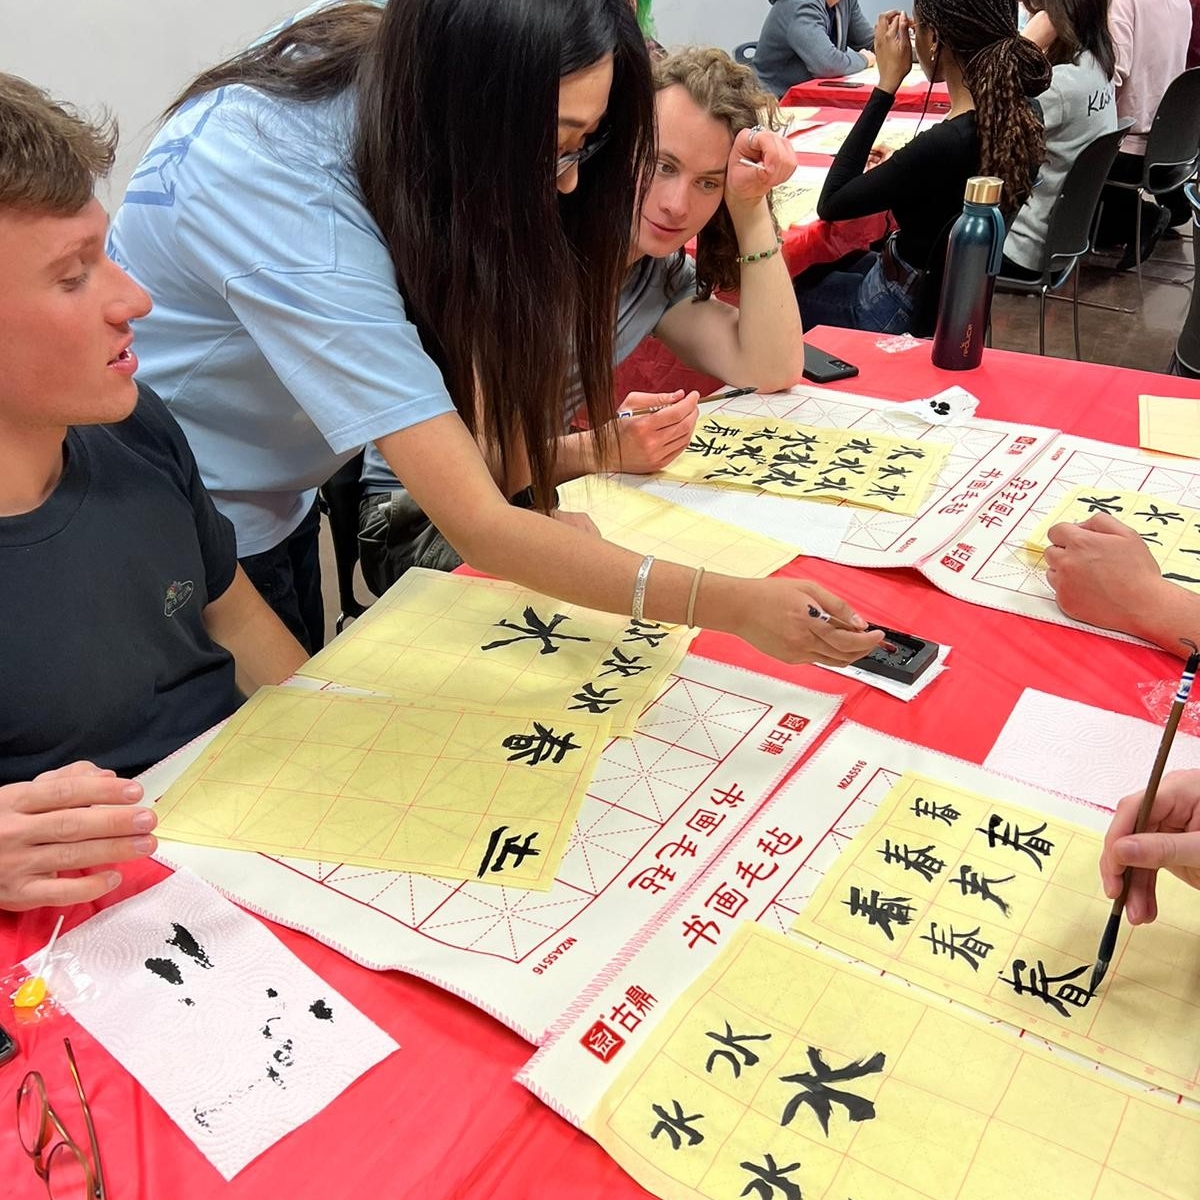 A tutor works with members of MOCHI practicing writing Chinese characters.